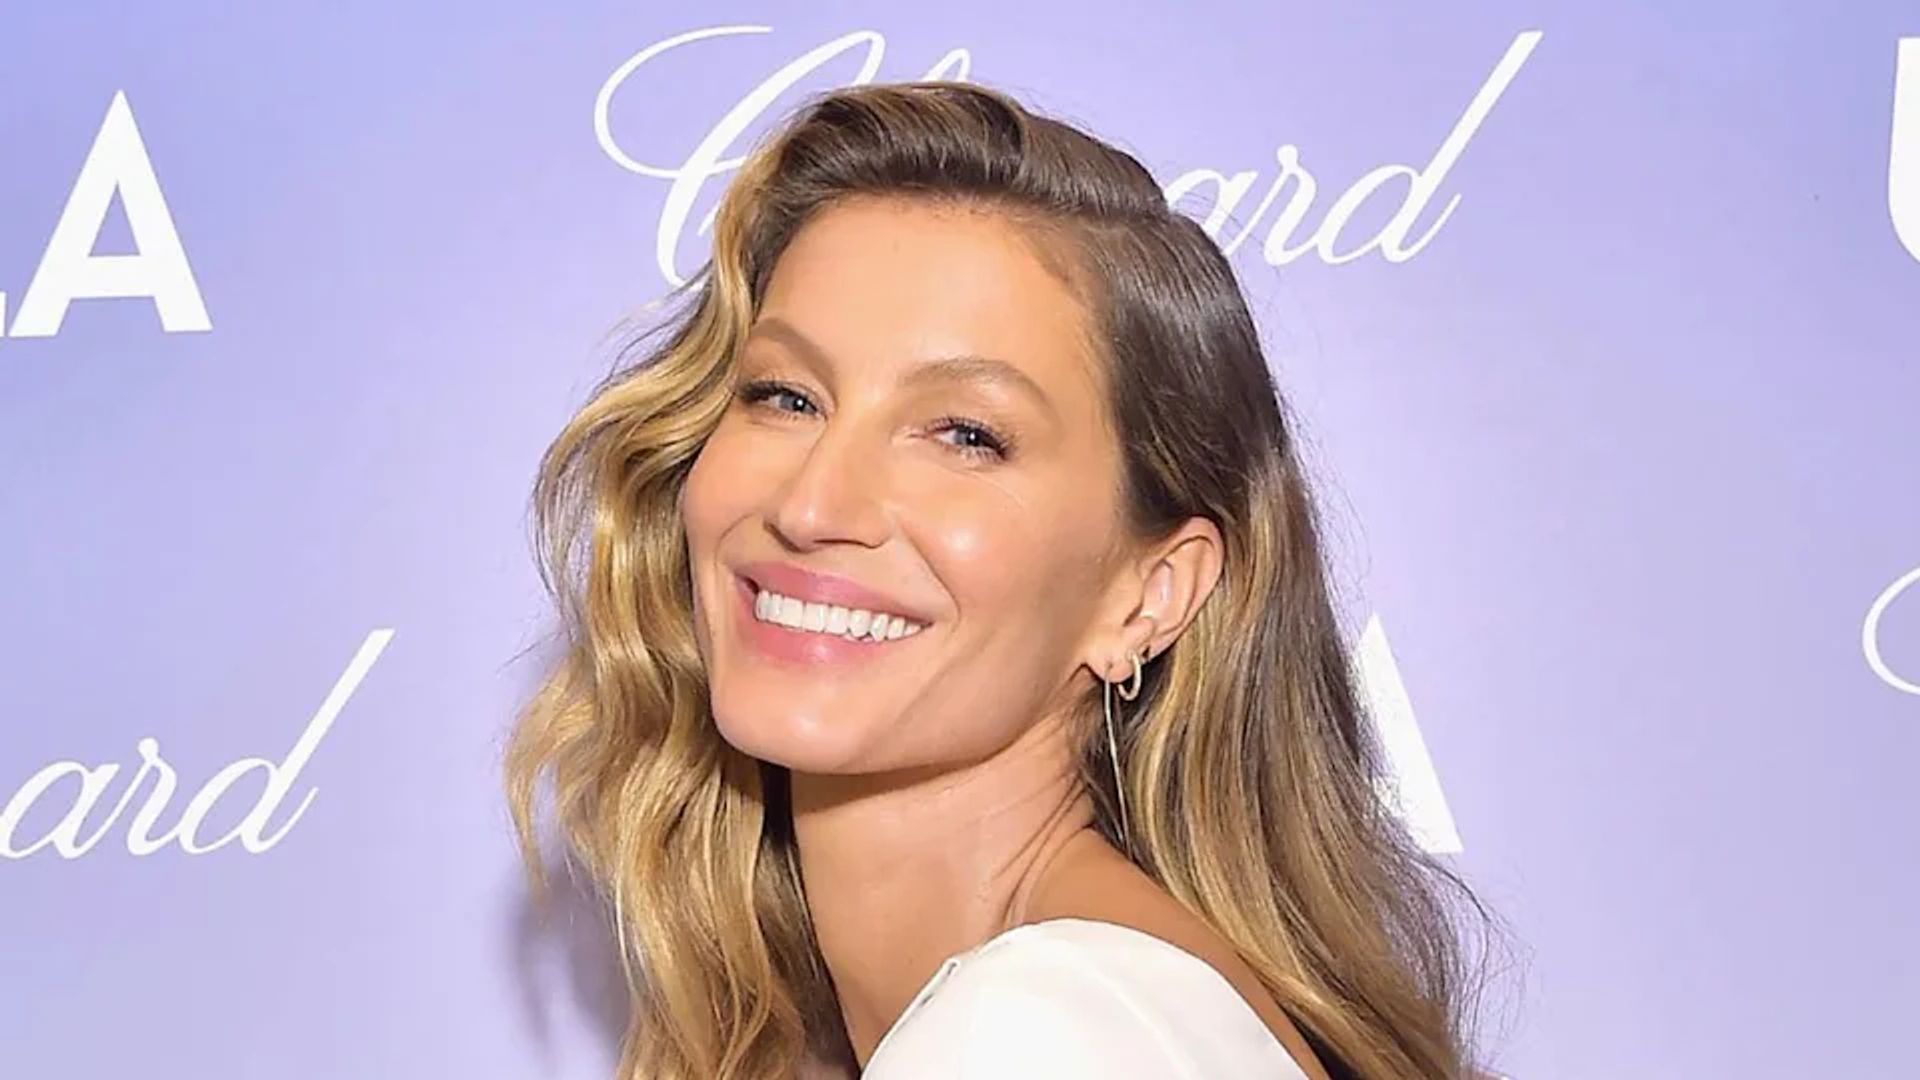 Gisele sets pulses racing in string bikini, shares message close to her heart